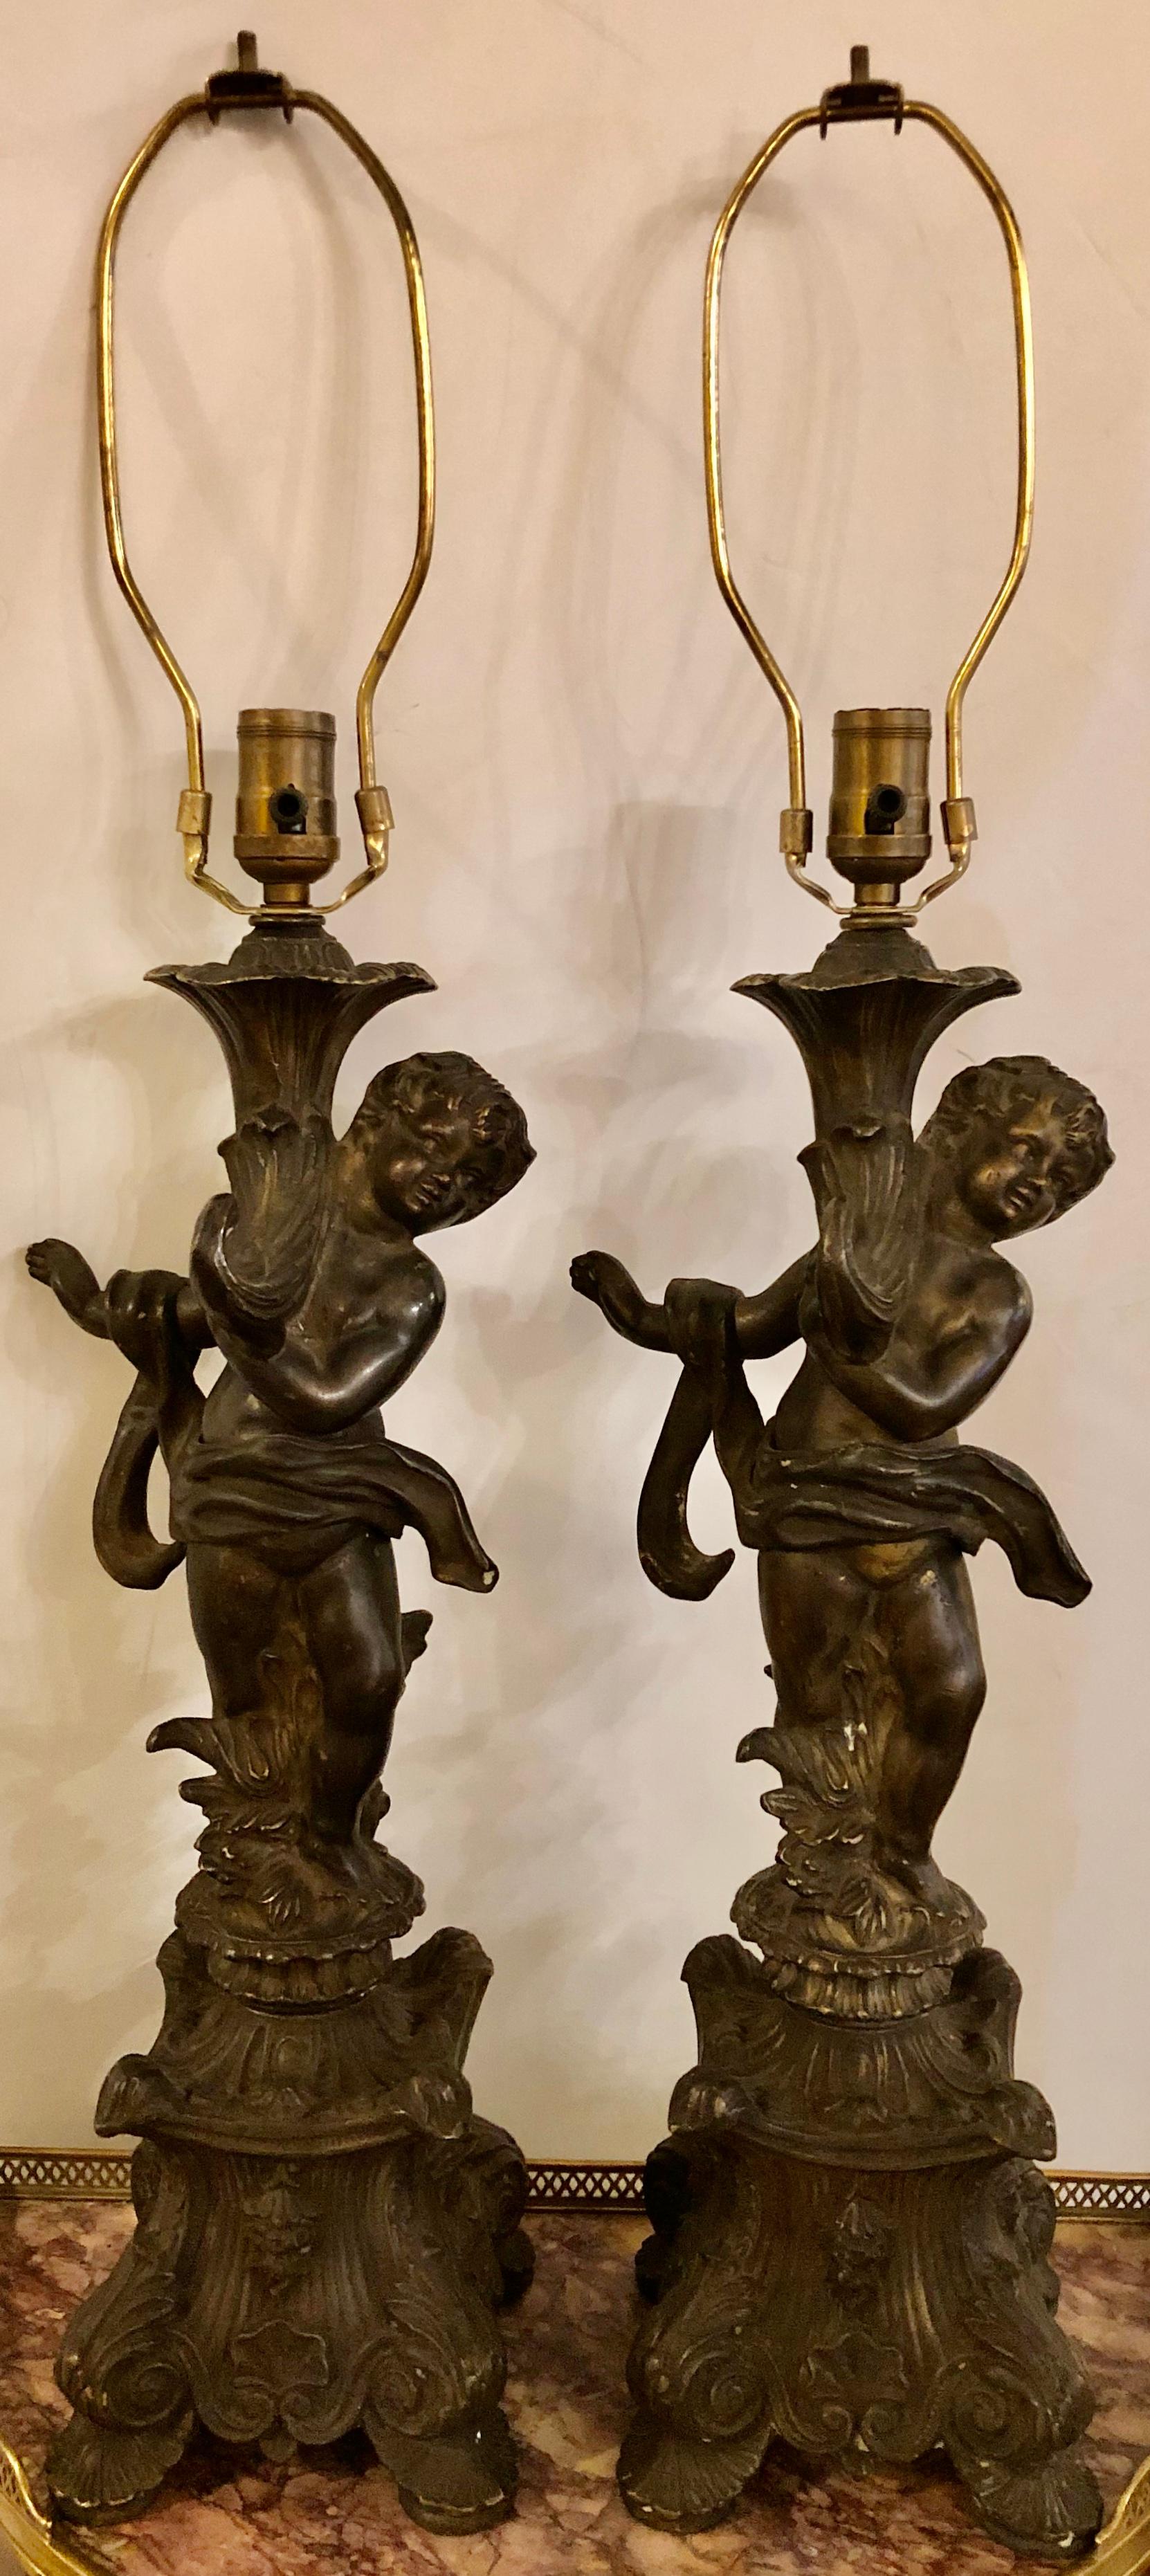 Pair of bronze patinated putti table lamps each in the Louis XVI manner holding up a cornucopia on top of a pedestal base. Each lamp takes one sixty-watt light bulb.
ISX.